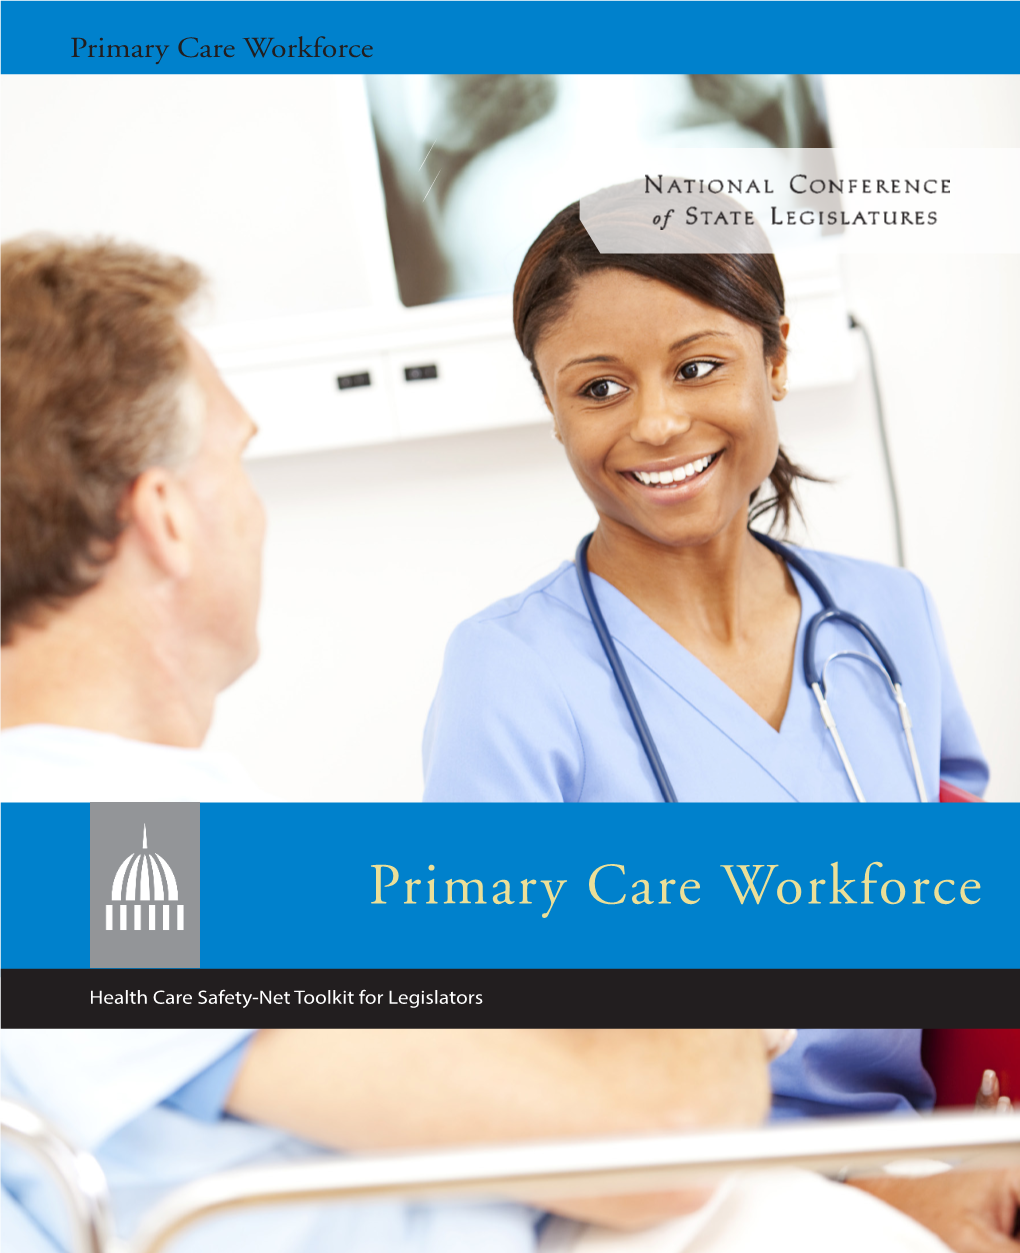 Primary Care Workforce